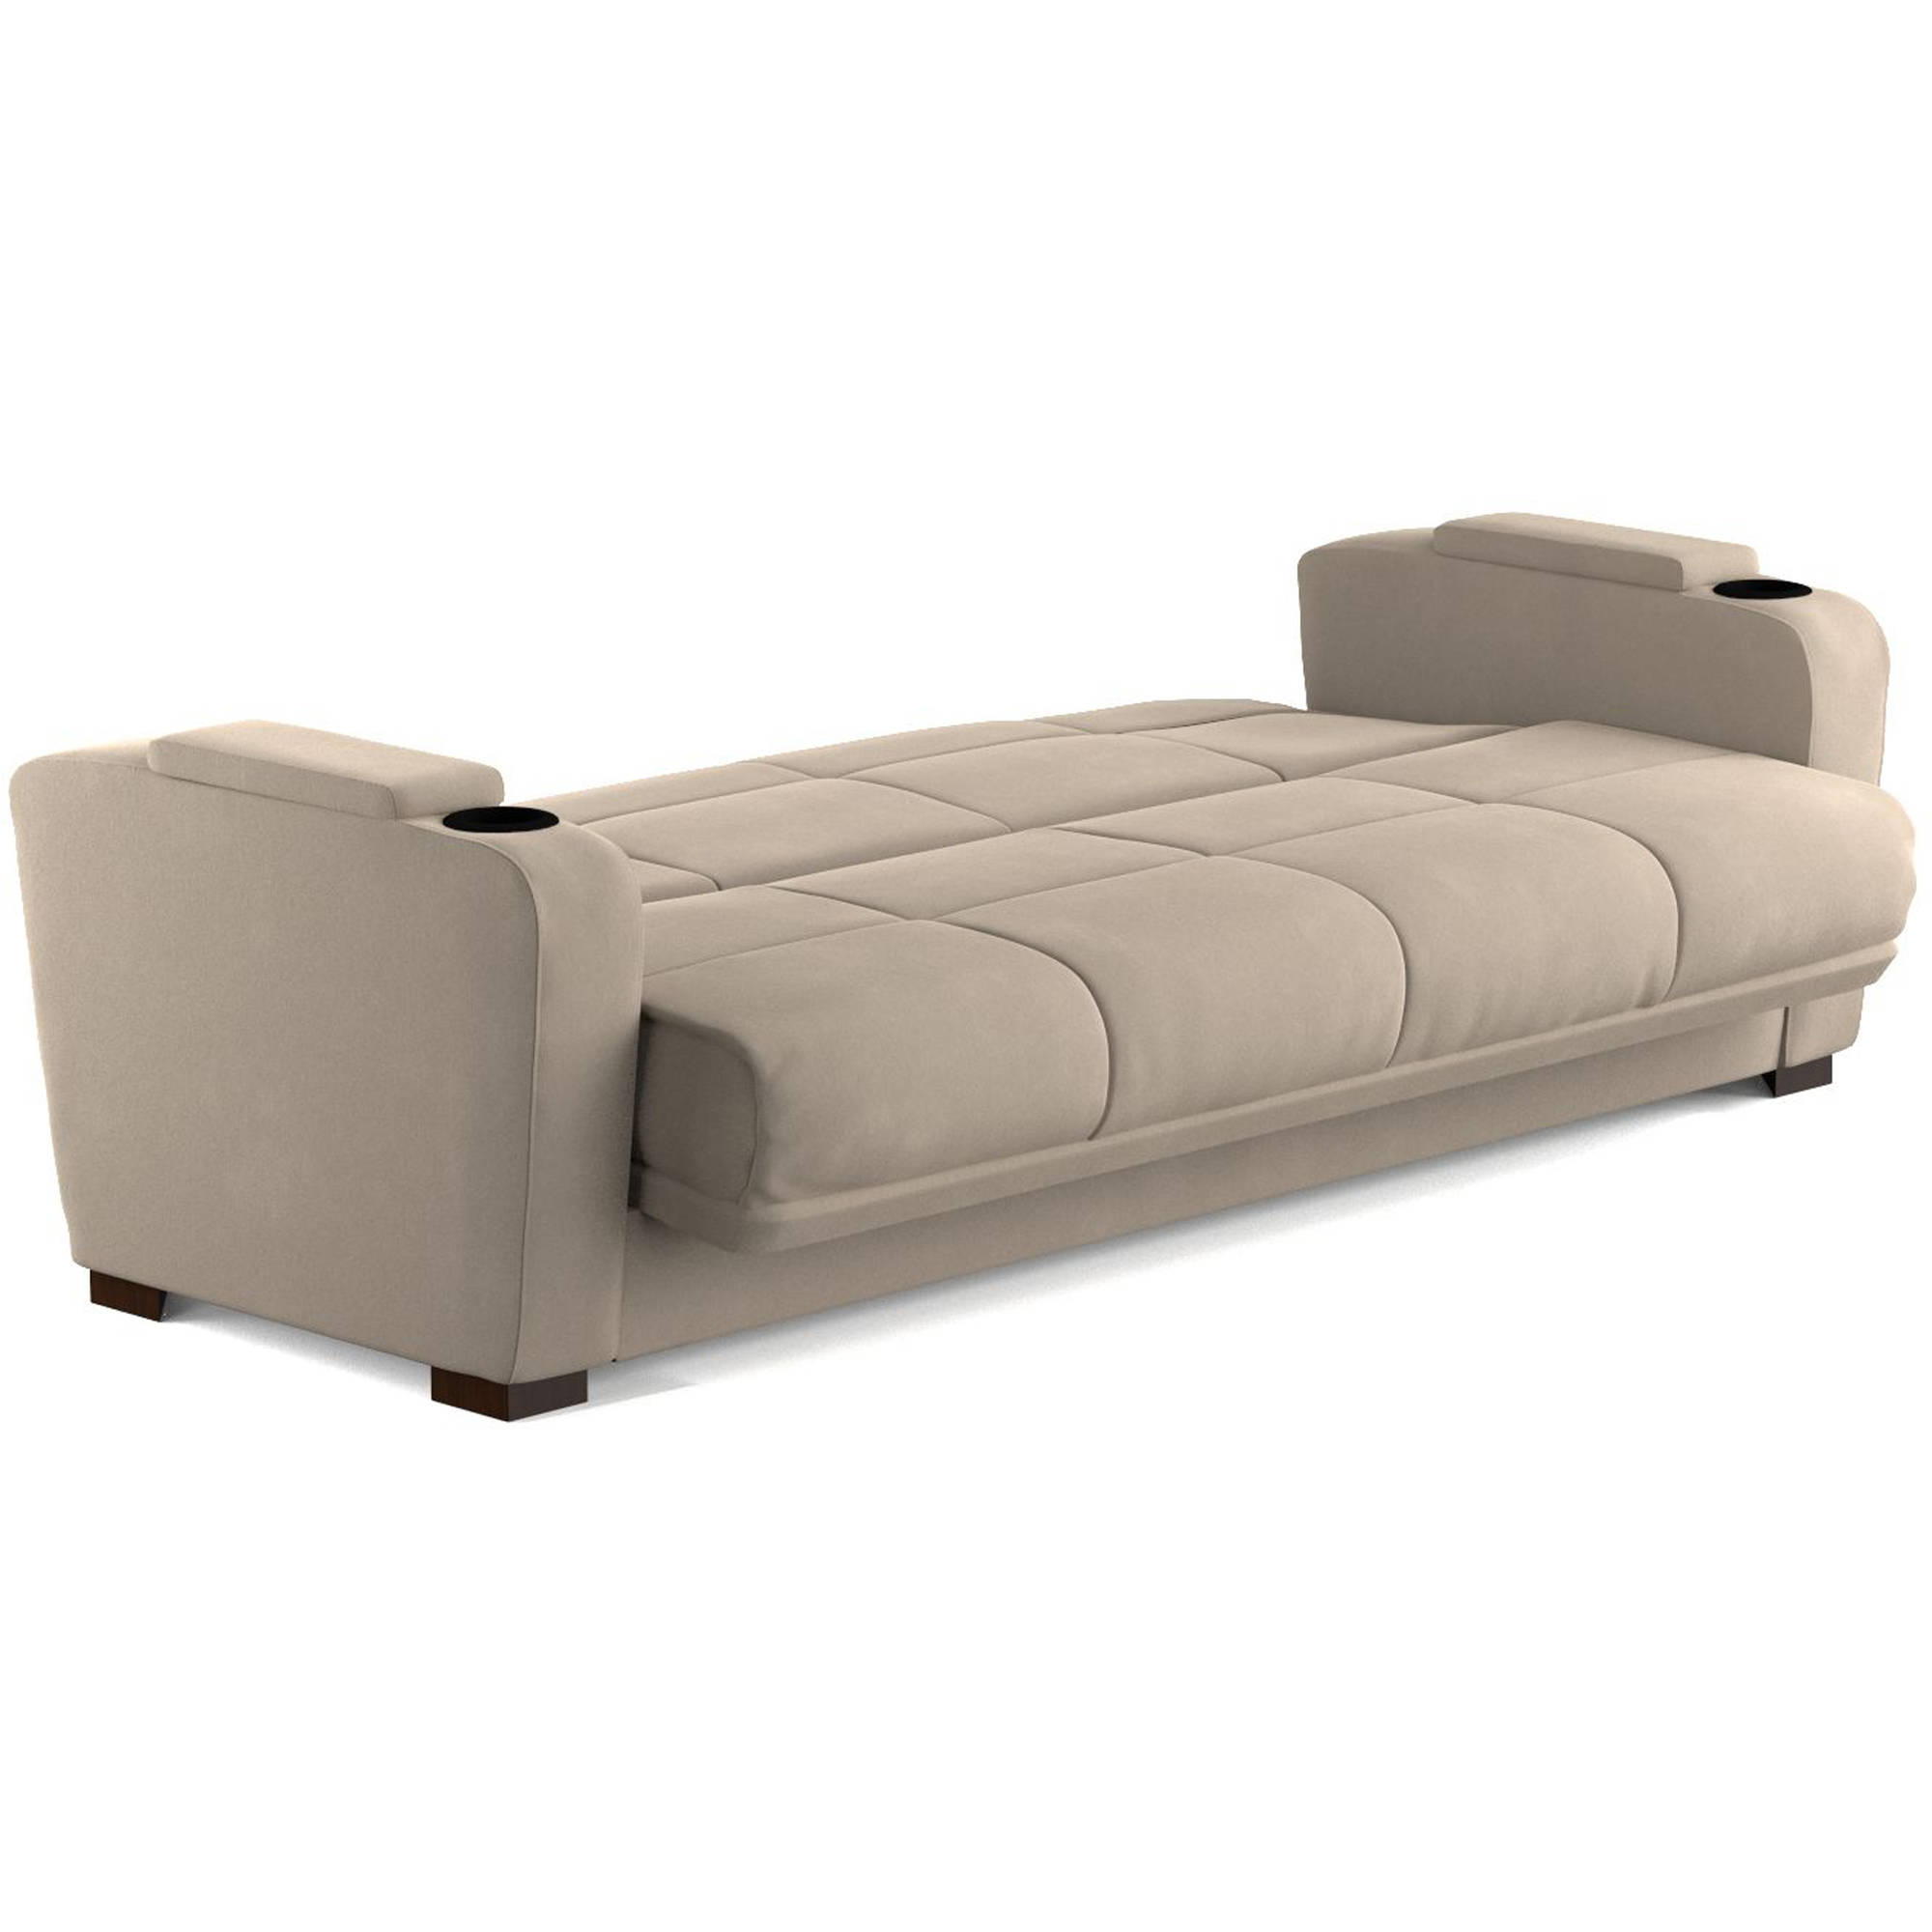 Mainstays Tyler Futon with Storage Sofa Bed, Multiple Colors - ZZJFNYQ